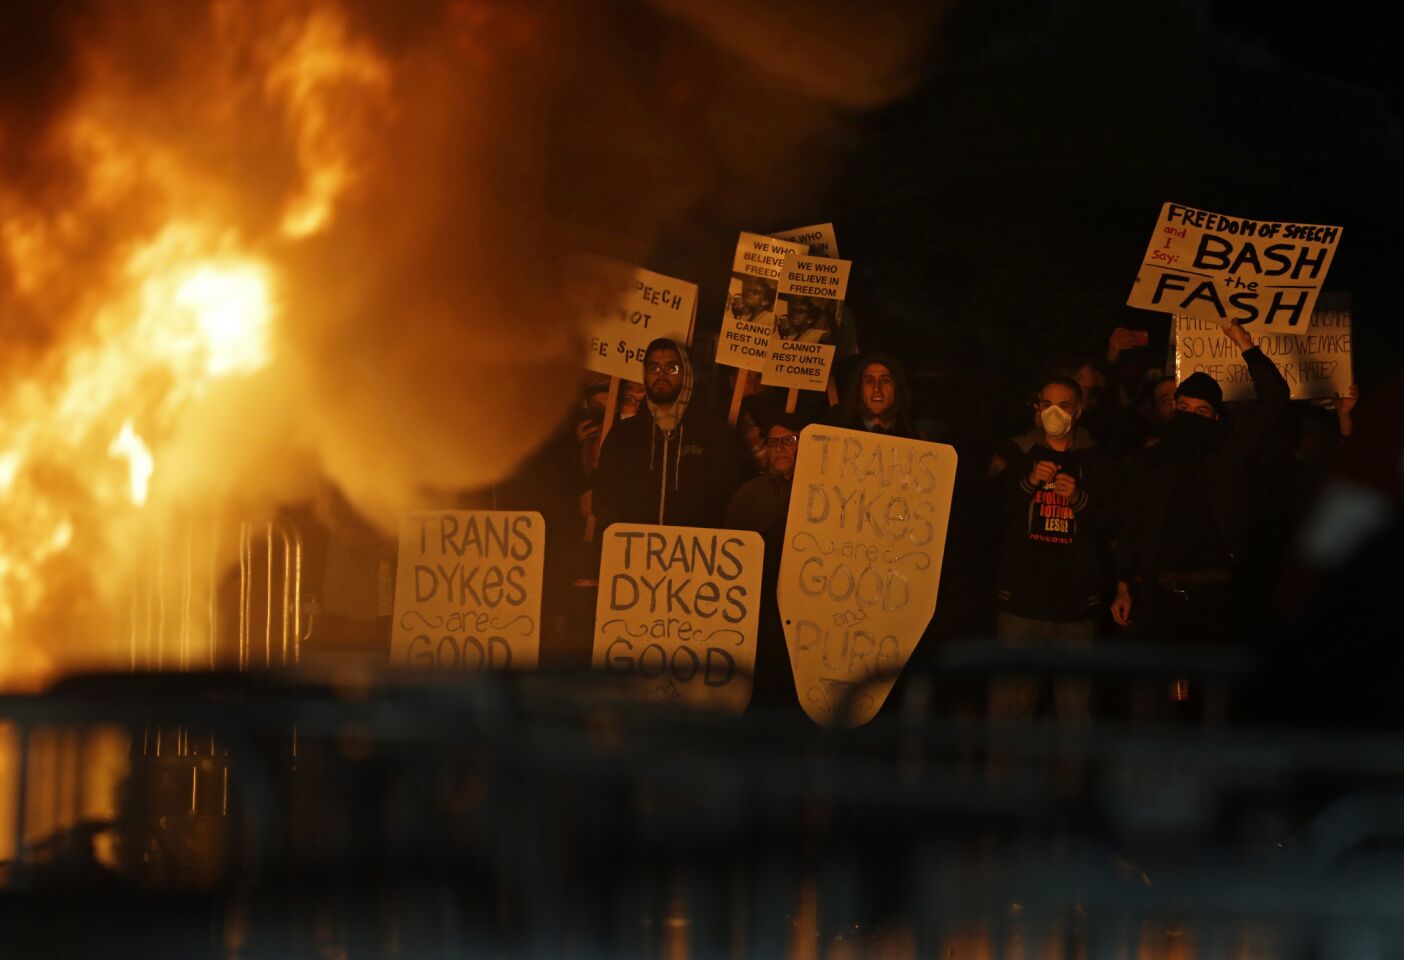 Protesters watch a fire on Sproul Plaza during a rally against the scheduled appearance by Breitbart News editor Milo Yiannopoulos at UC Berkeley.